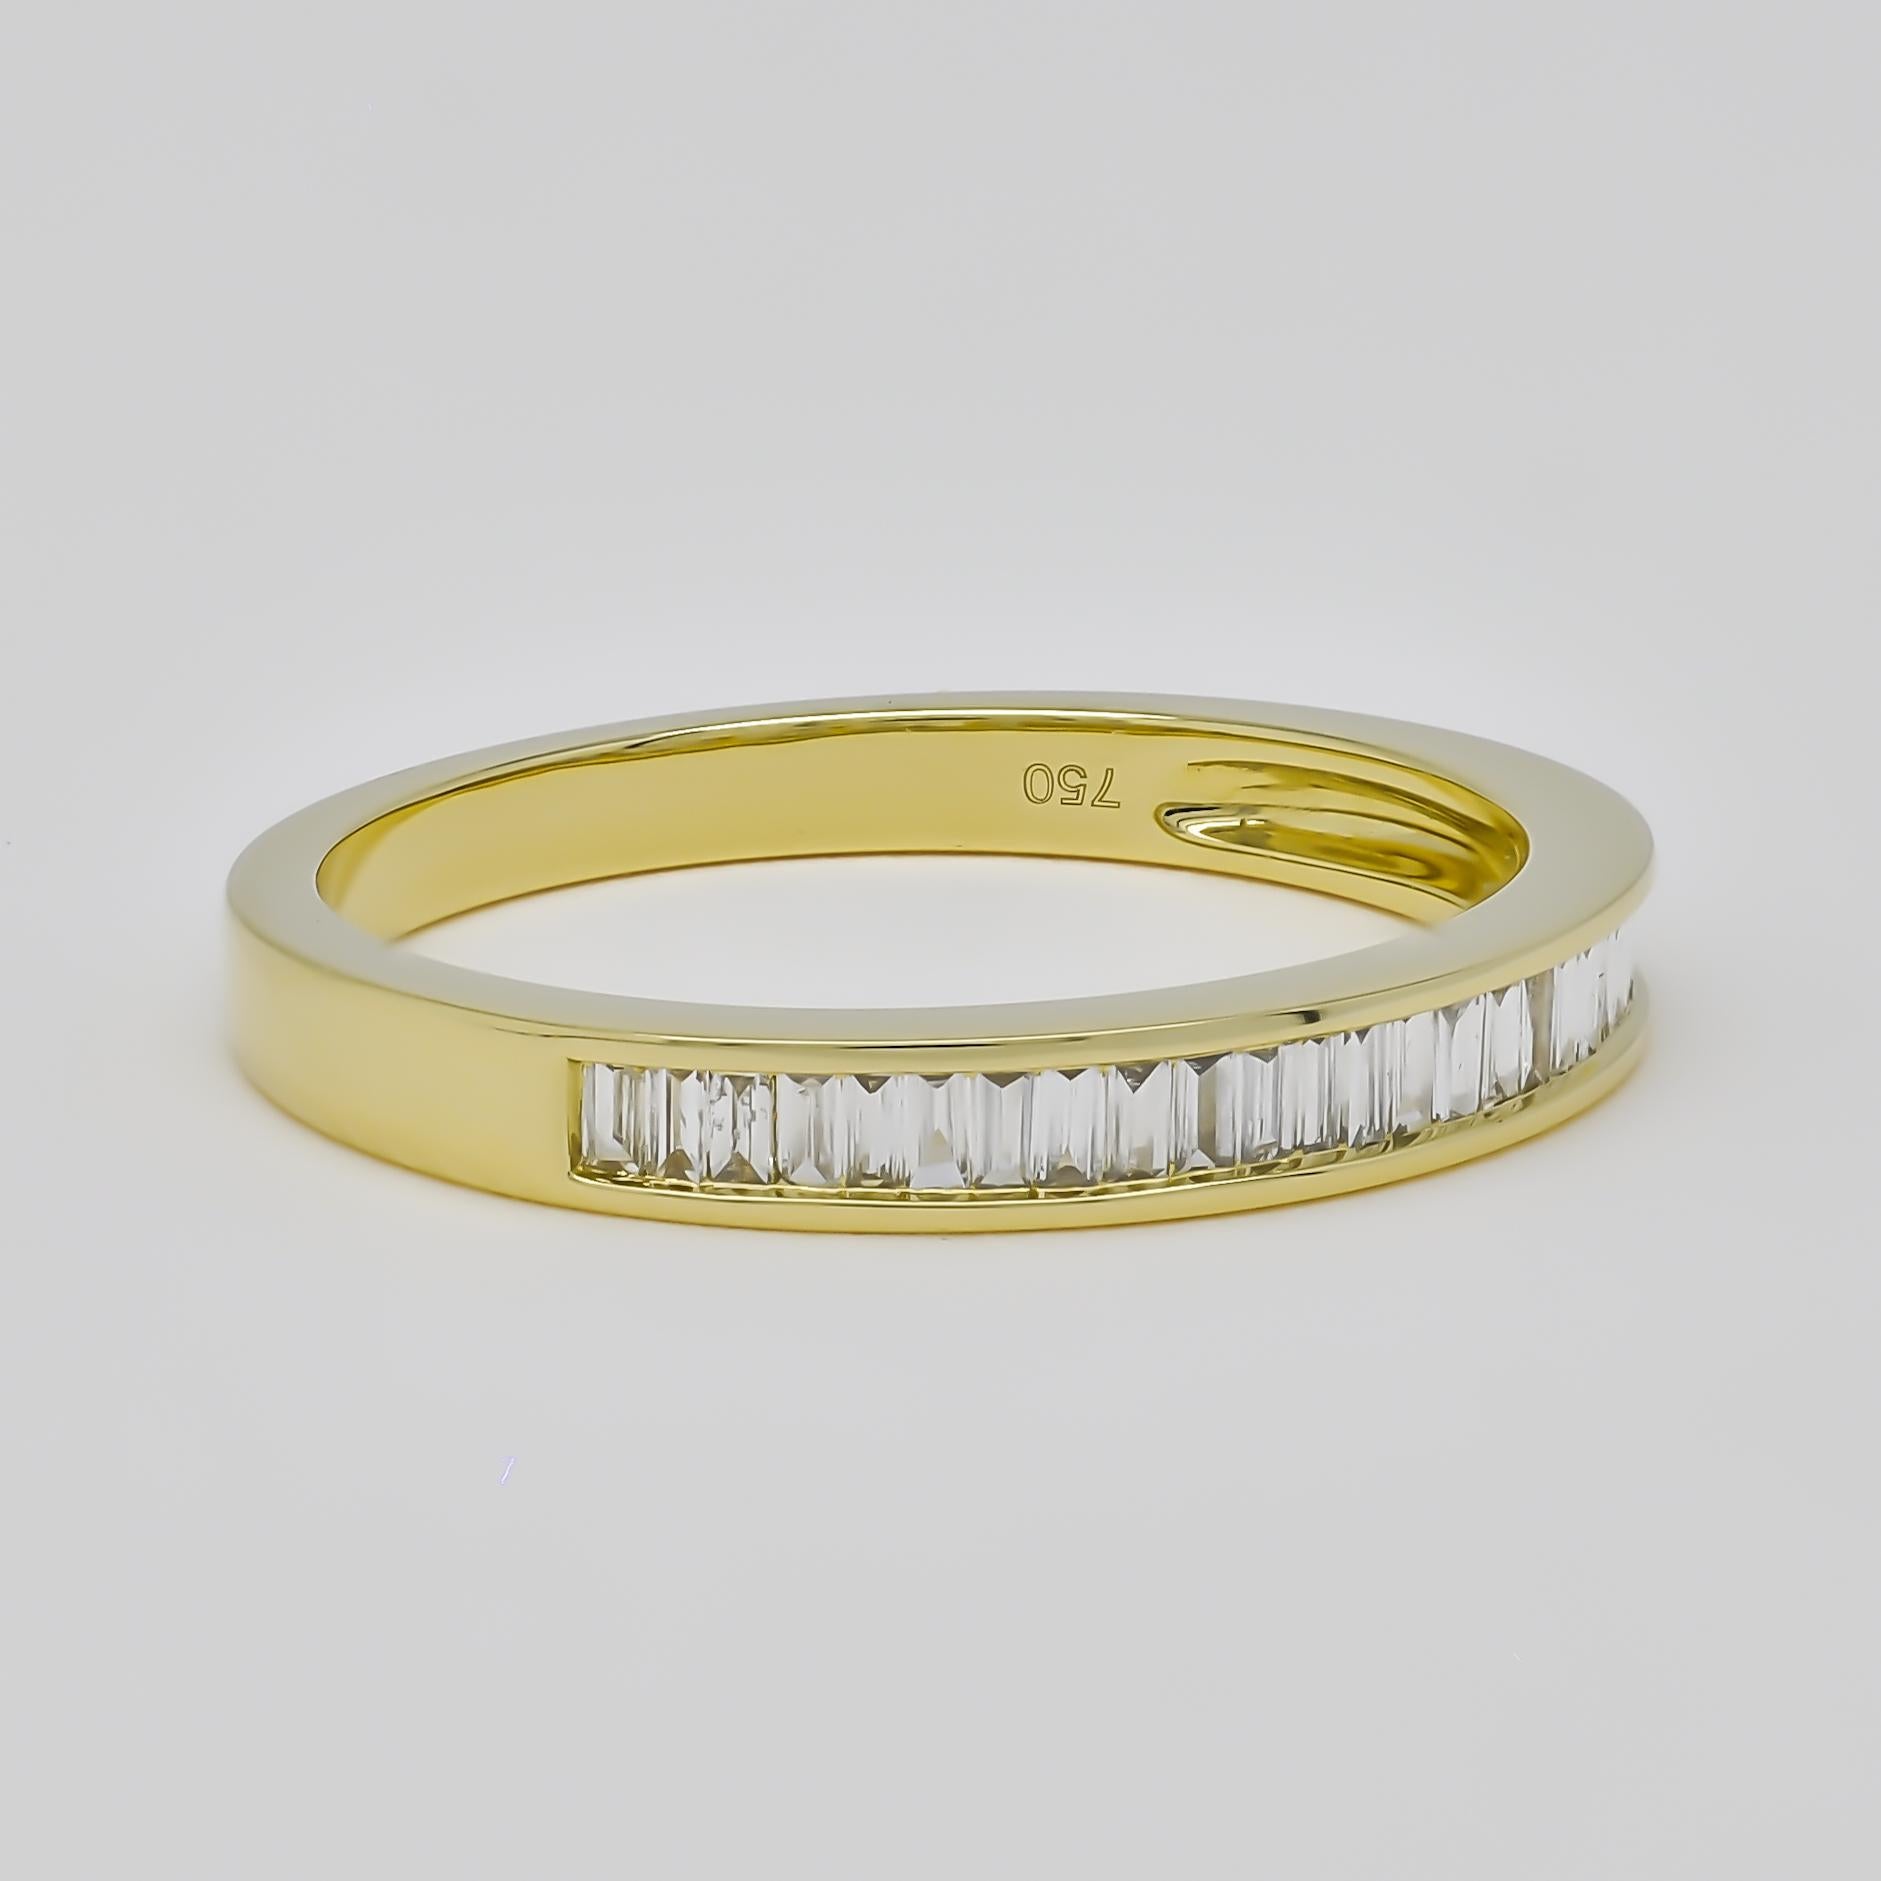 You know You'll be Together Forever and This Sparkling Baguette Diamond Half- Eternity Band Expresses Your Love Perfectly.


This luxurious ring is enhanced with a high polish finish and is the perfect choice for the woman you love as you celebrate